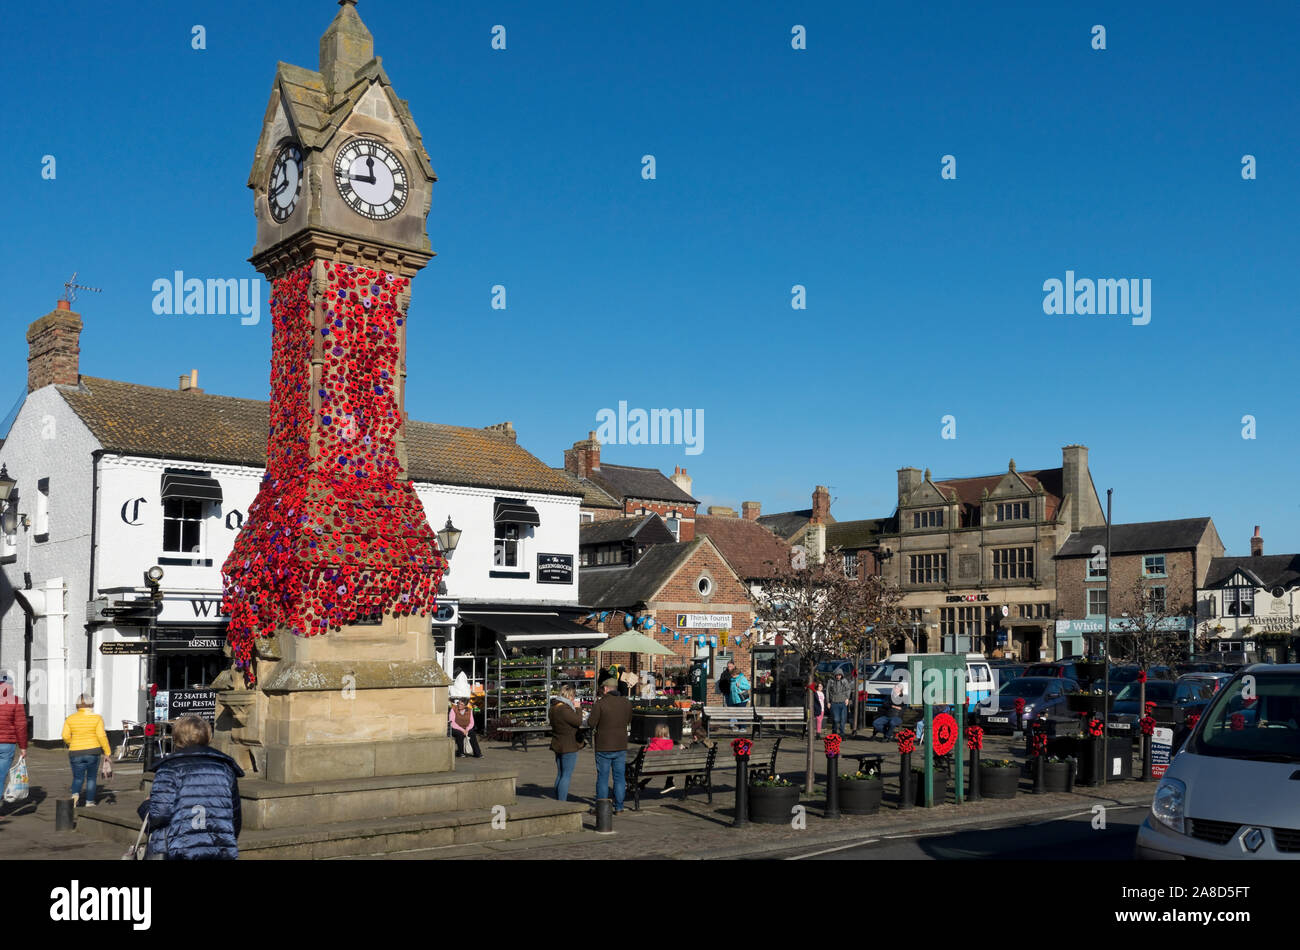 Remembrance Day poppy knitted poppies yarn bombing on clock tower Market Square Thirsk North Yorkshire England UK United Kingdom GB Great Britain Stock Photo